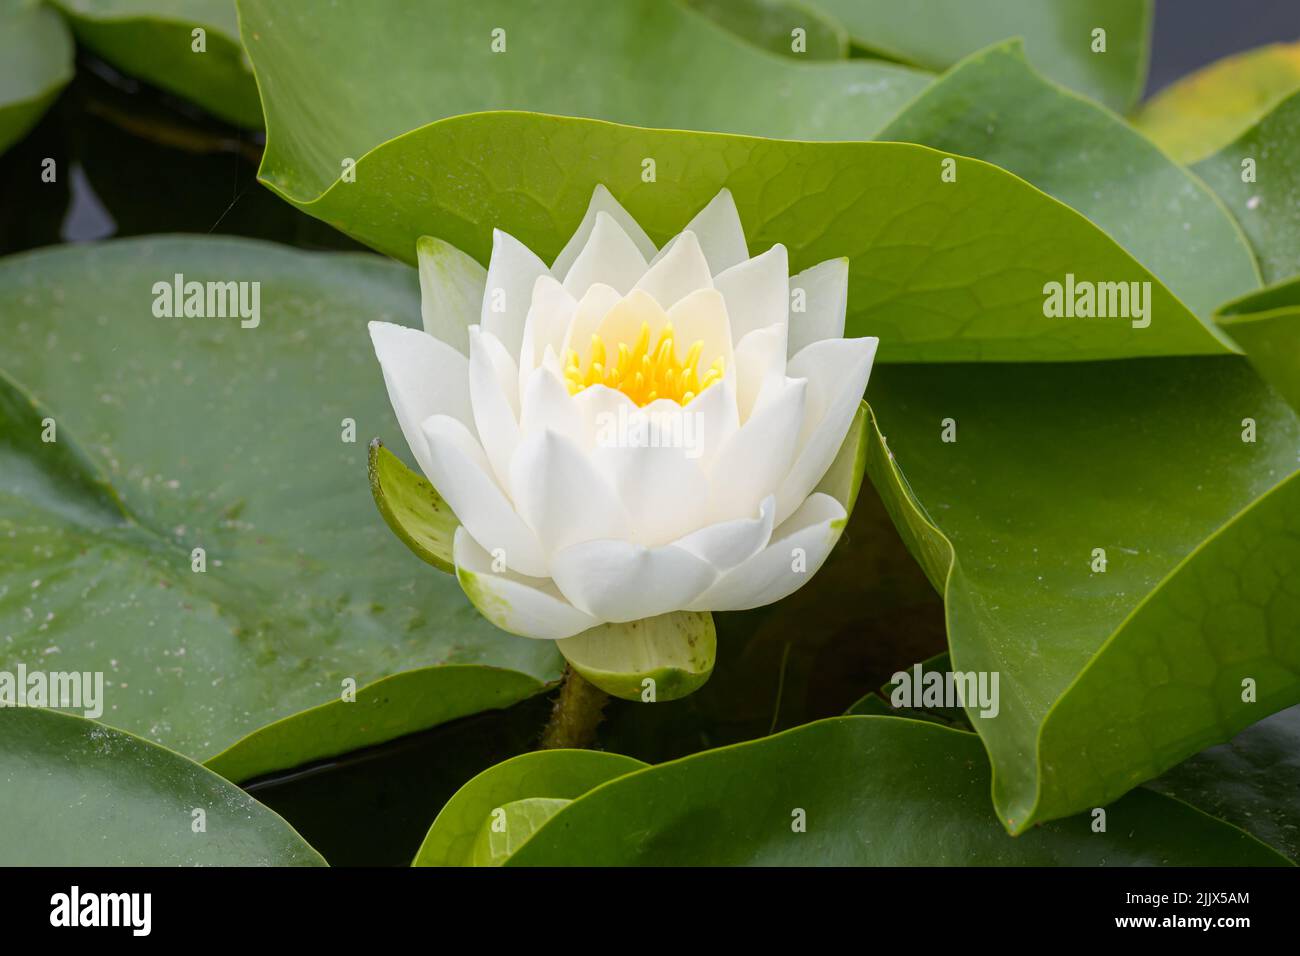 A single white water lily flower is central in a group of green lily pads in closeup Stock Photo